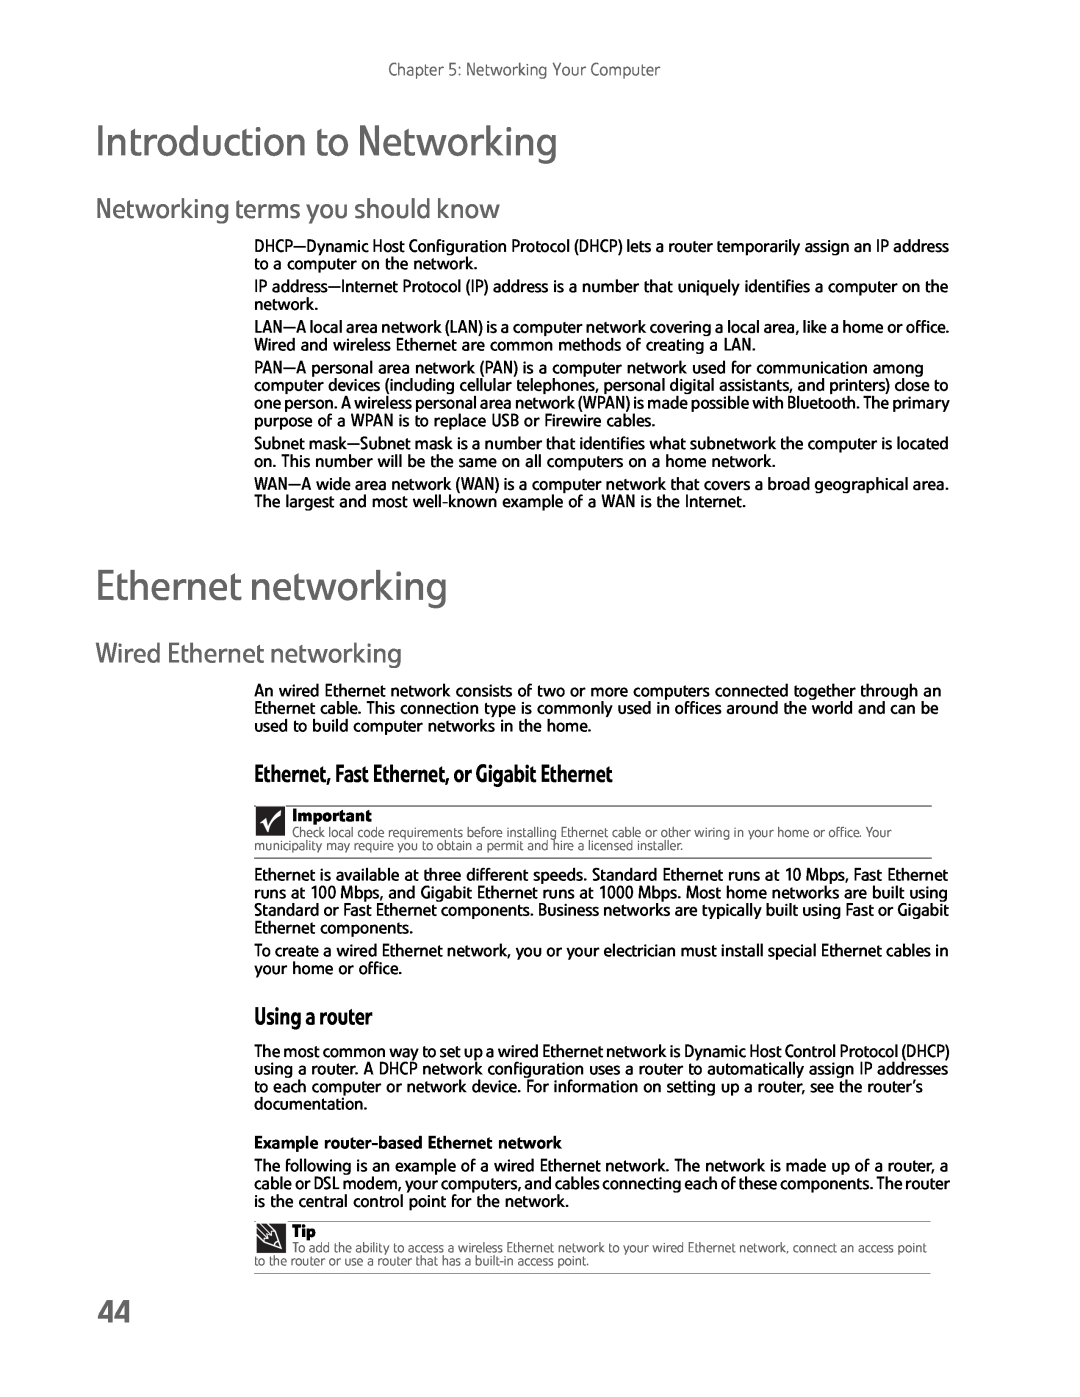 eMachines EL1200 Series Introduction to Networking, Ethernet networking, Networking terms you should know, Using a router 